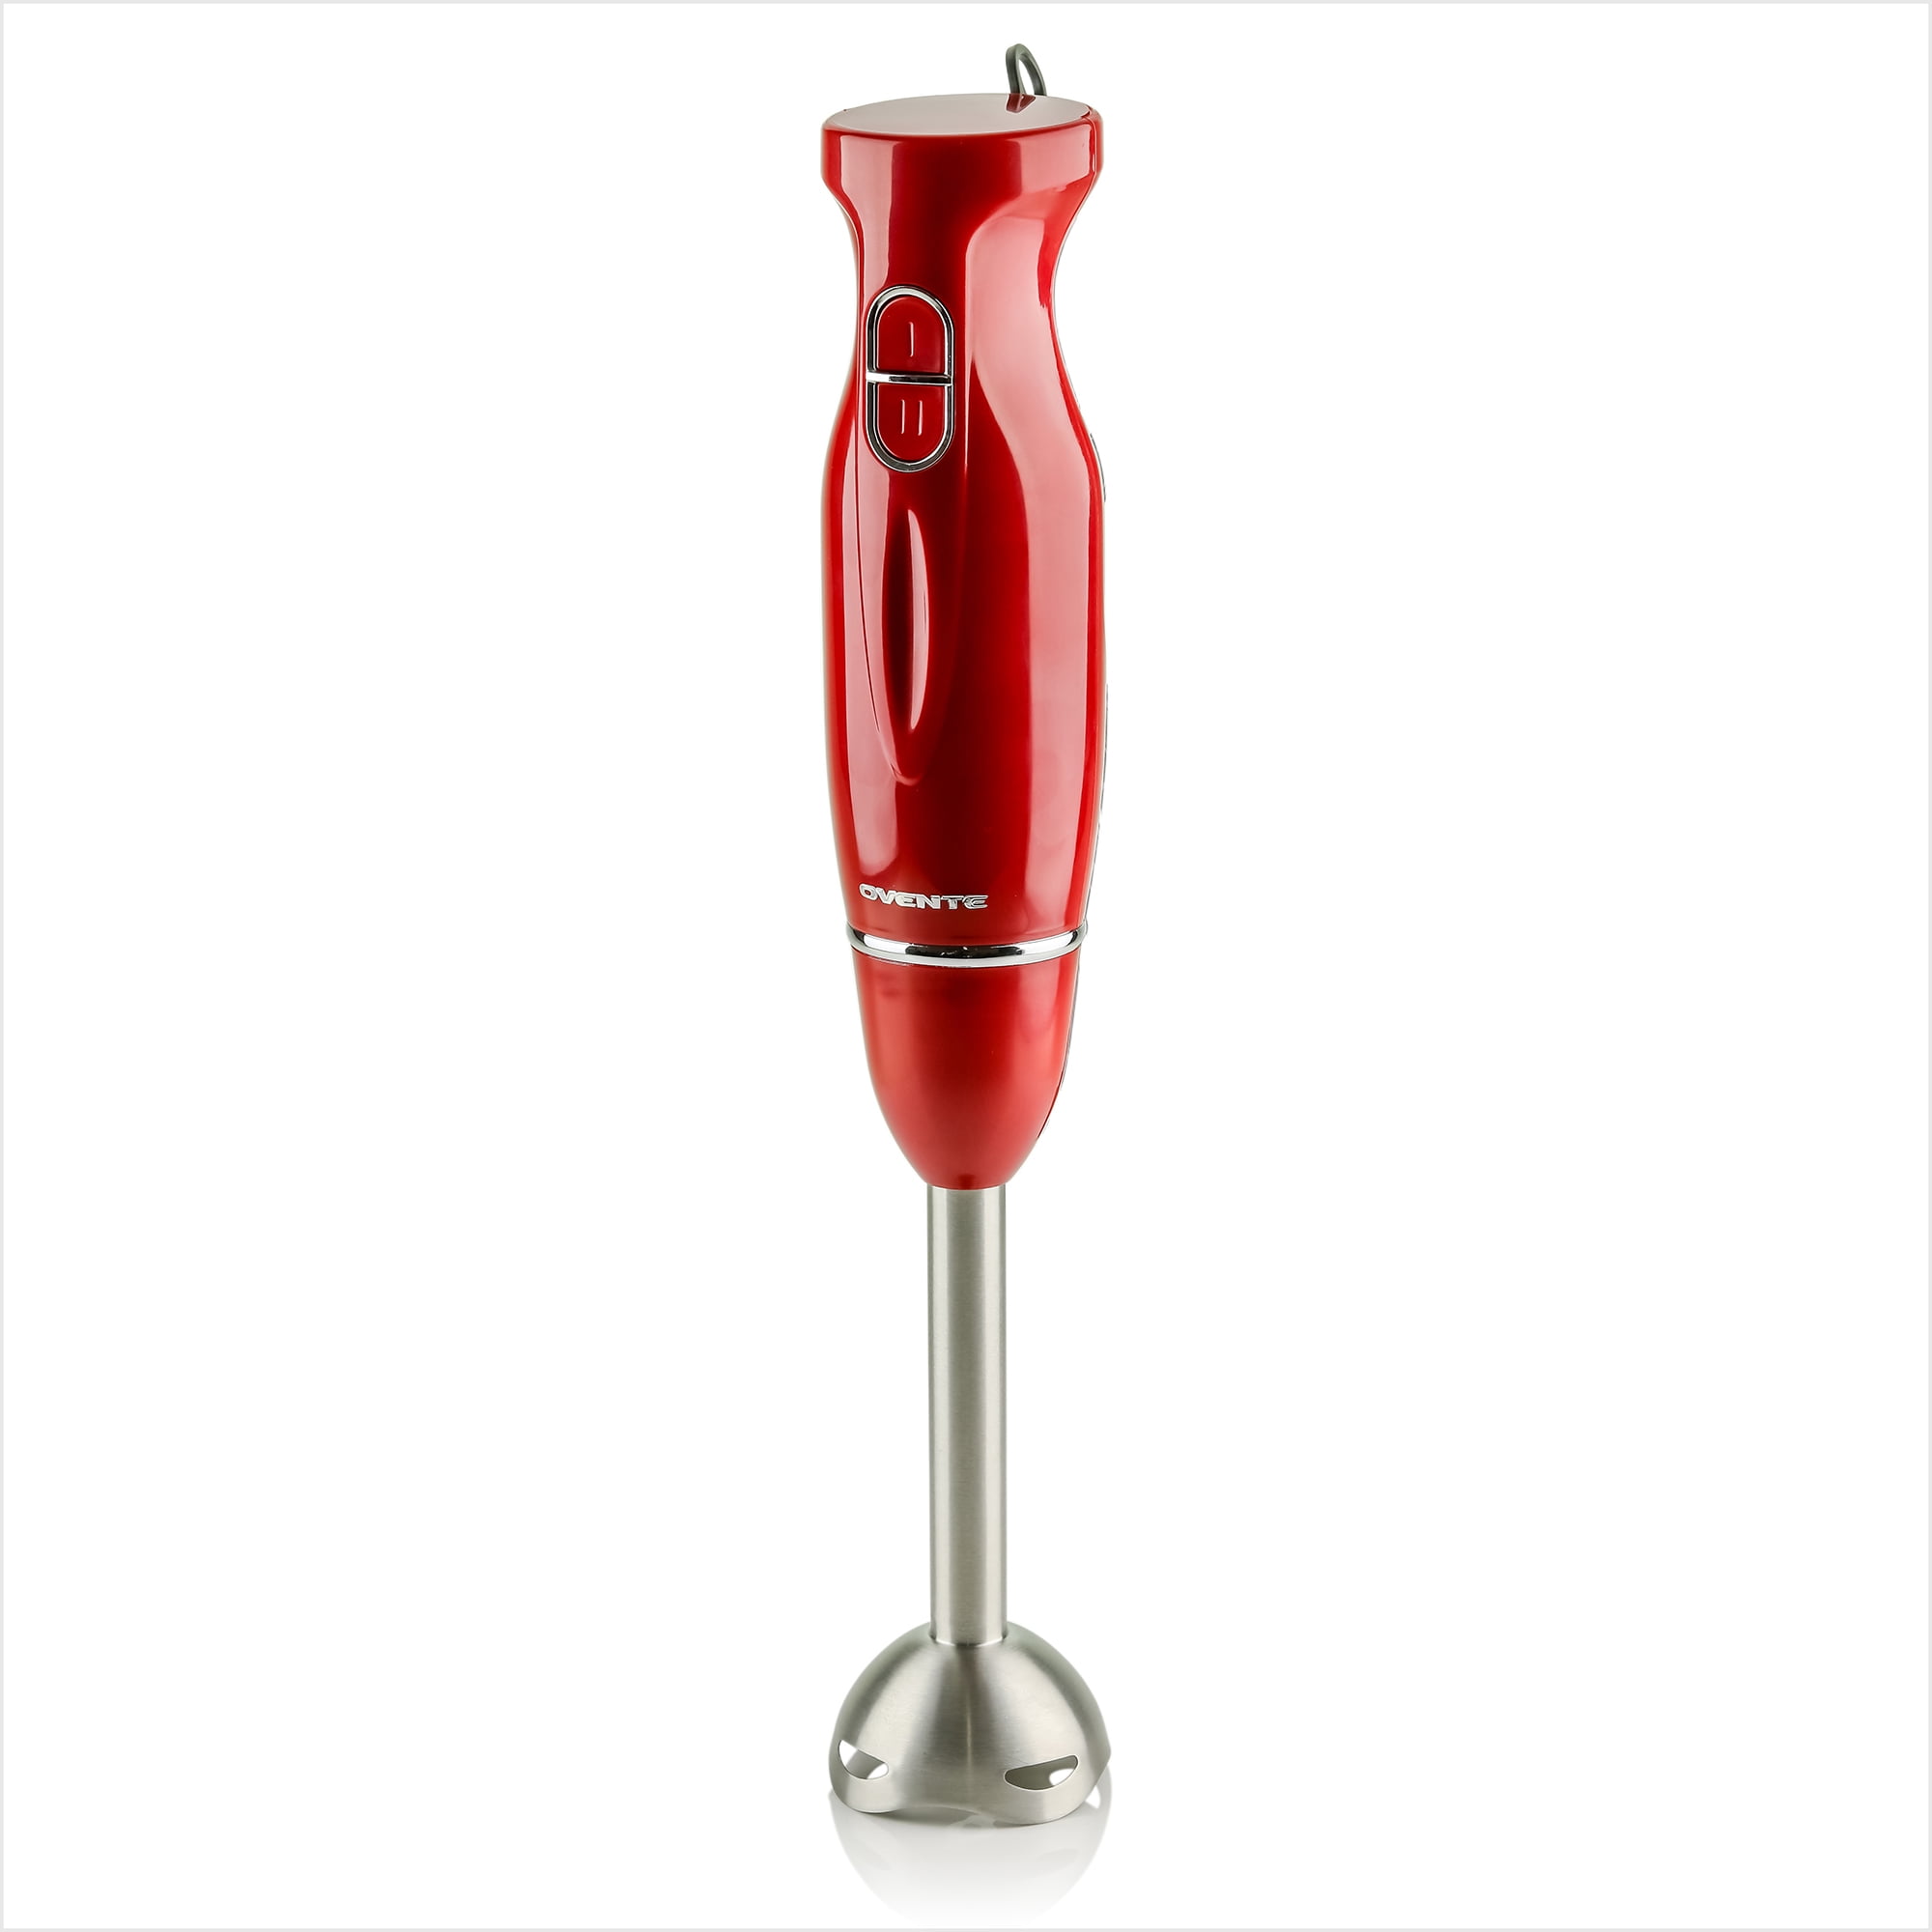 OVENTE Electric Immersion Hand Blender, 2 Mixing Speed with Stainless Steel  Blades, New- Red HS560R 